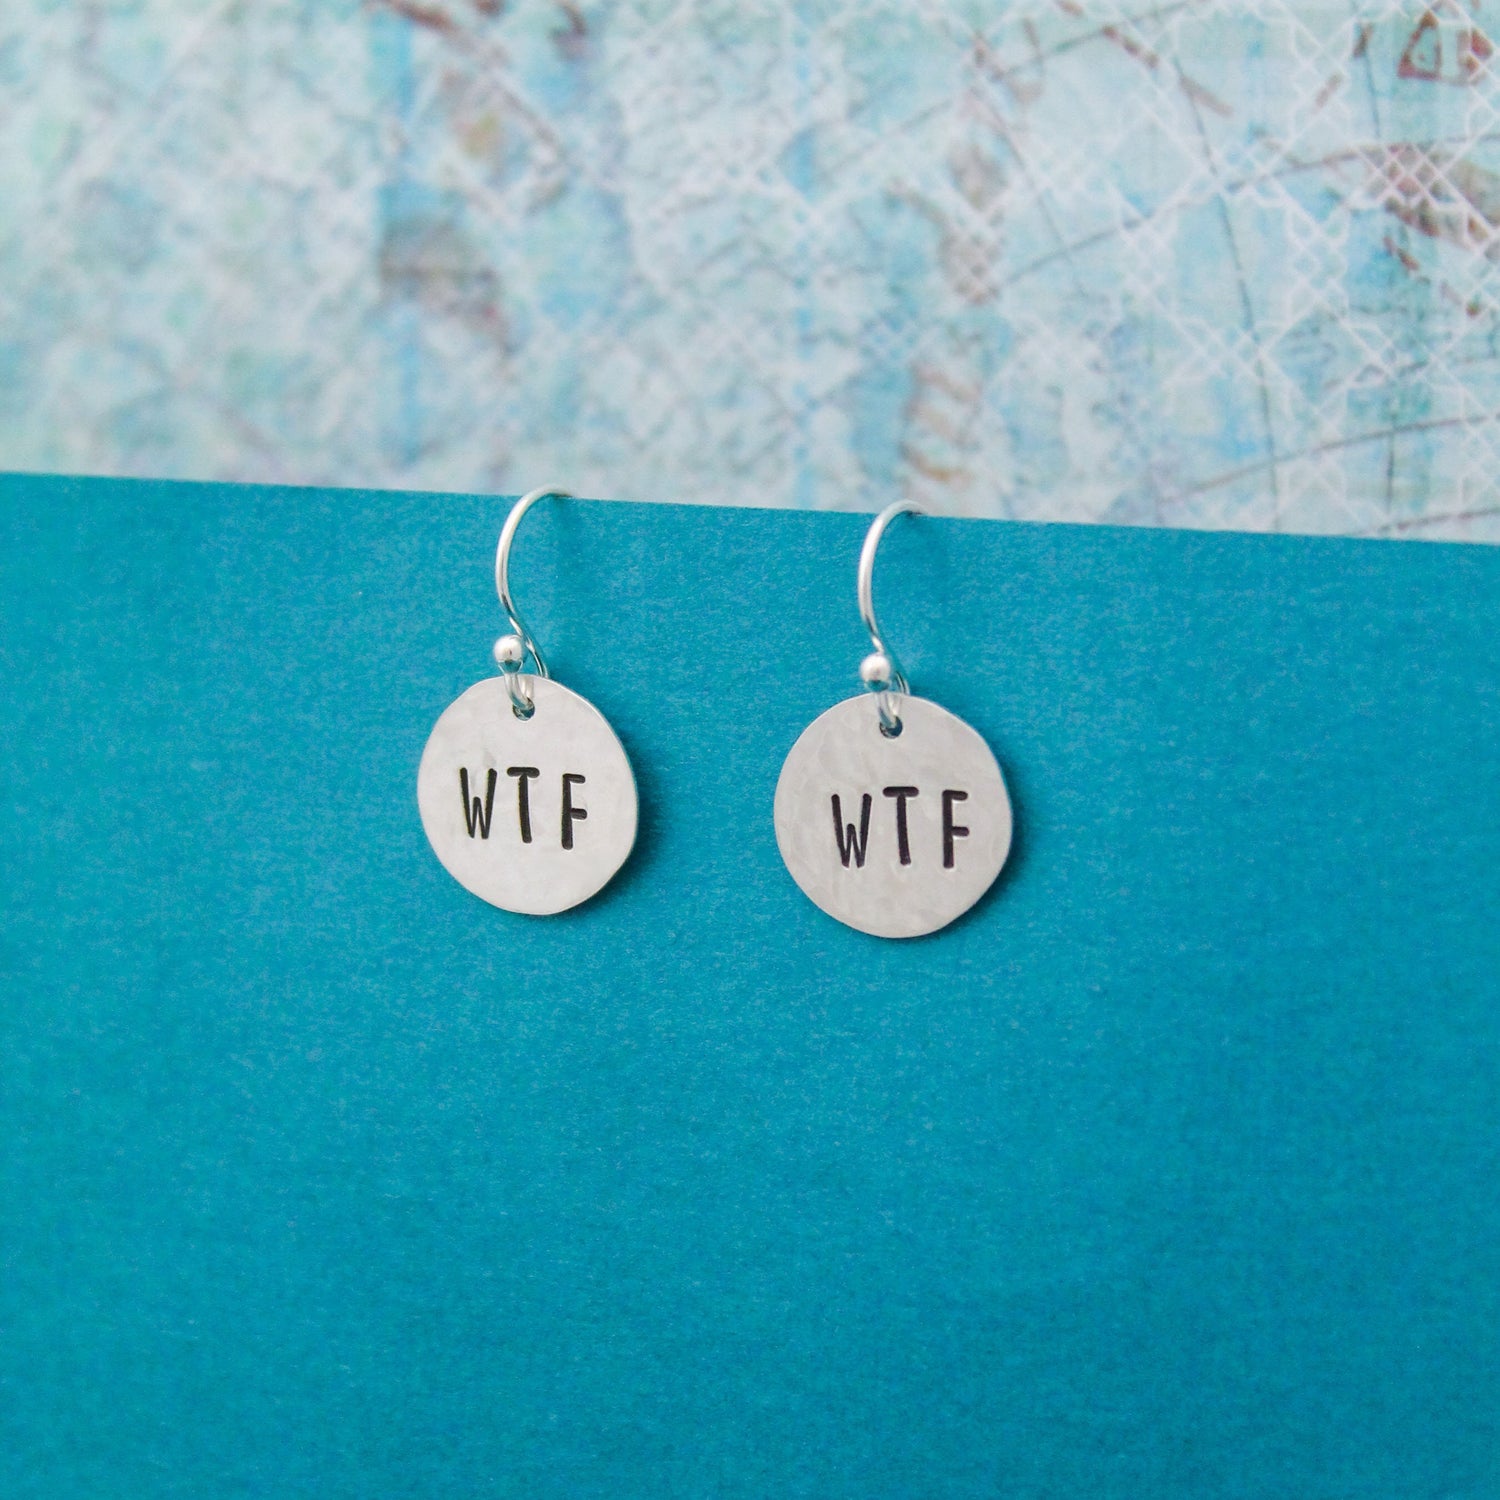 WTF Sterling Silver Earrings, What the Fuck Jewelry, Hand Stamped Personalized Earrings, Explicit Curse Word Jewelry WTF Cute Gift for Her